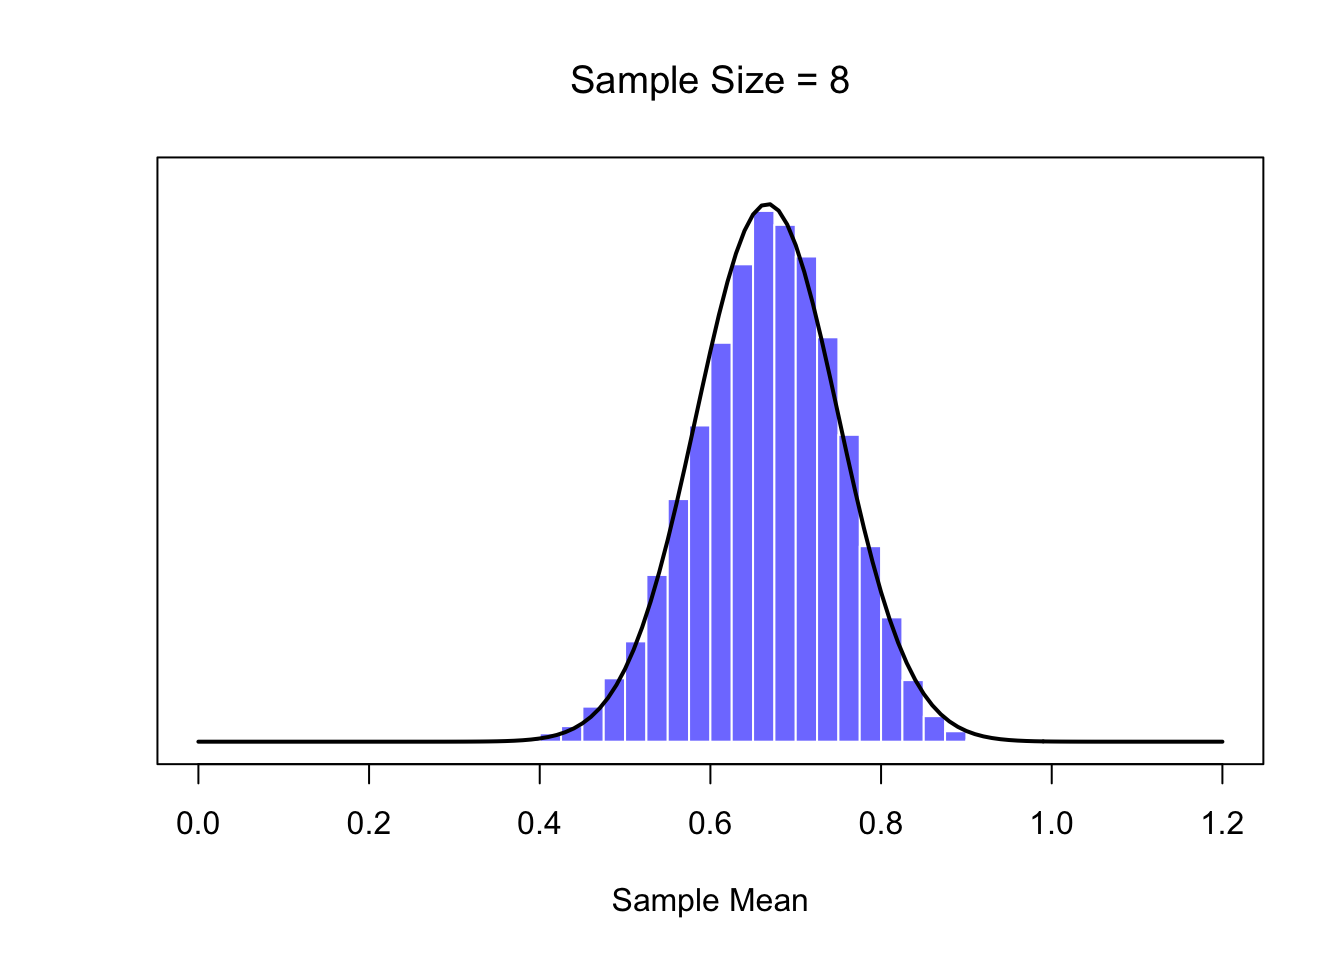 A demonstration of the central limit theorem. In panel a, we have a non-normal population distribution; and panels b-d show the sampling distribution of the mean for samples of size 2,4 and 8, for data drawn from the distribution in panel a. As you can see, even though the original population distribution is non-normal, the sampling distribution of the mean becomes pretty close to normal by the time you have a sample of even 4 observations. 